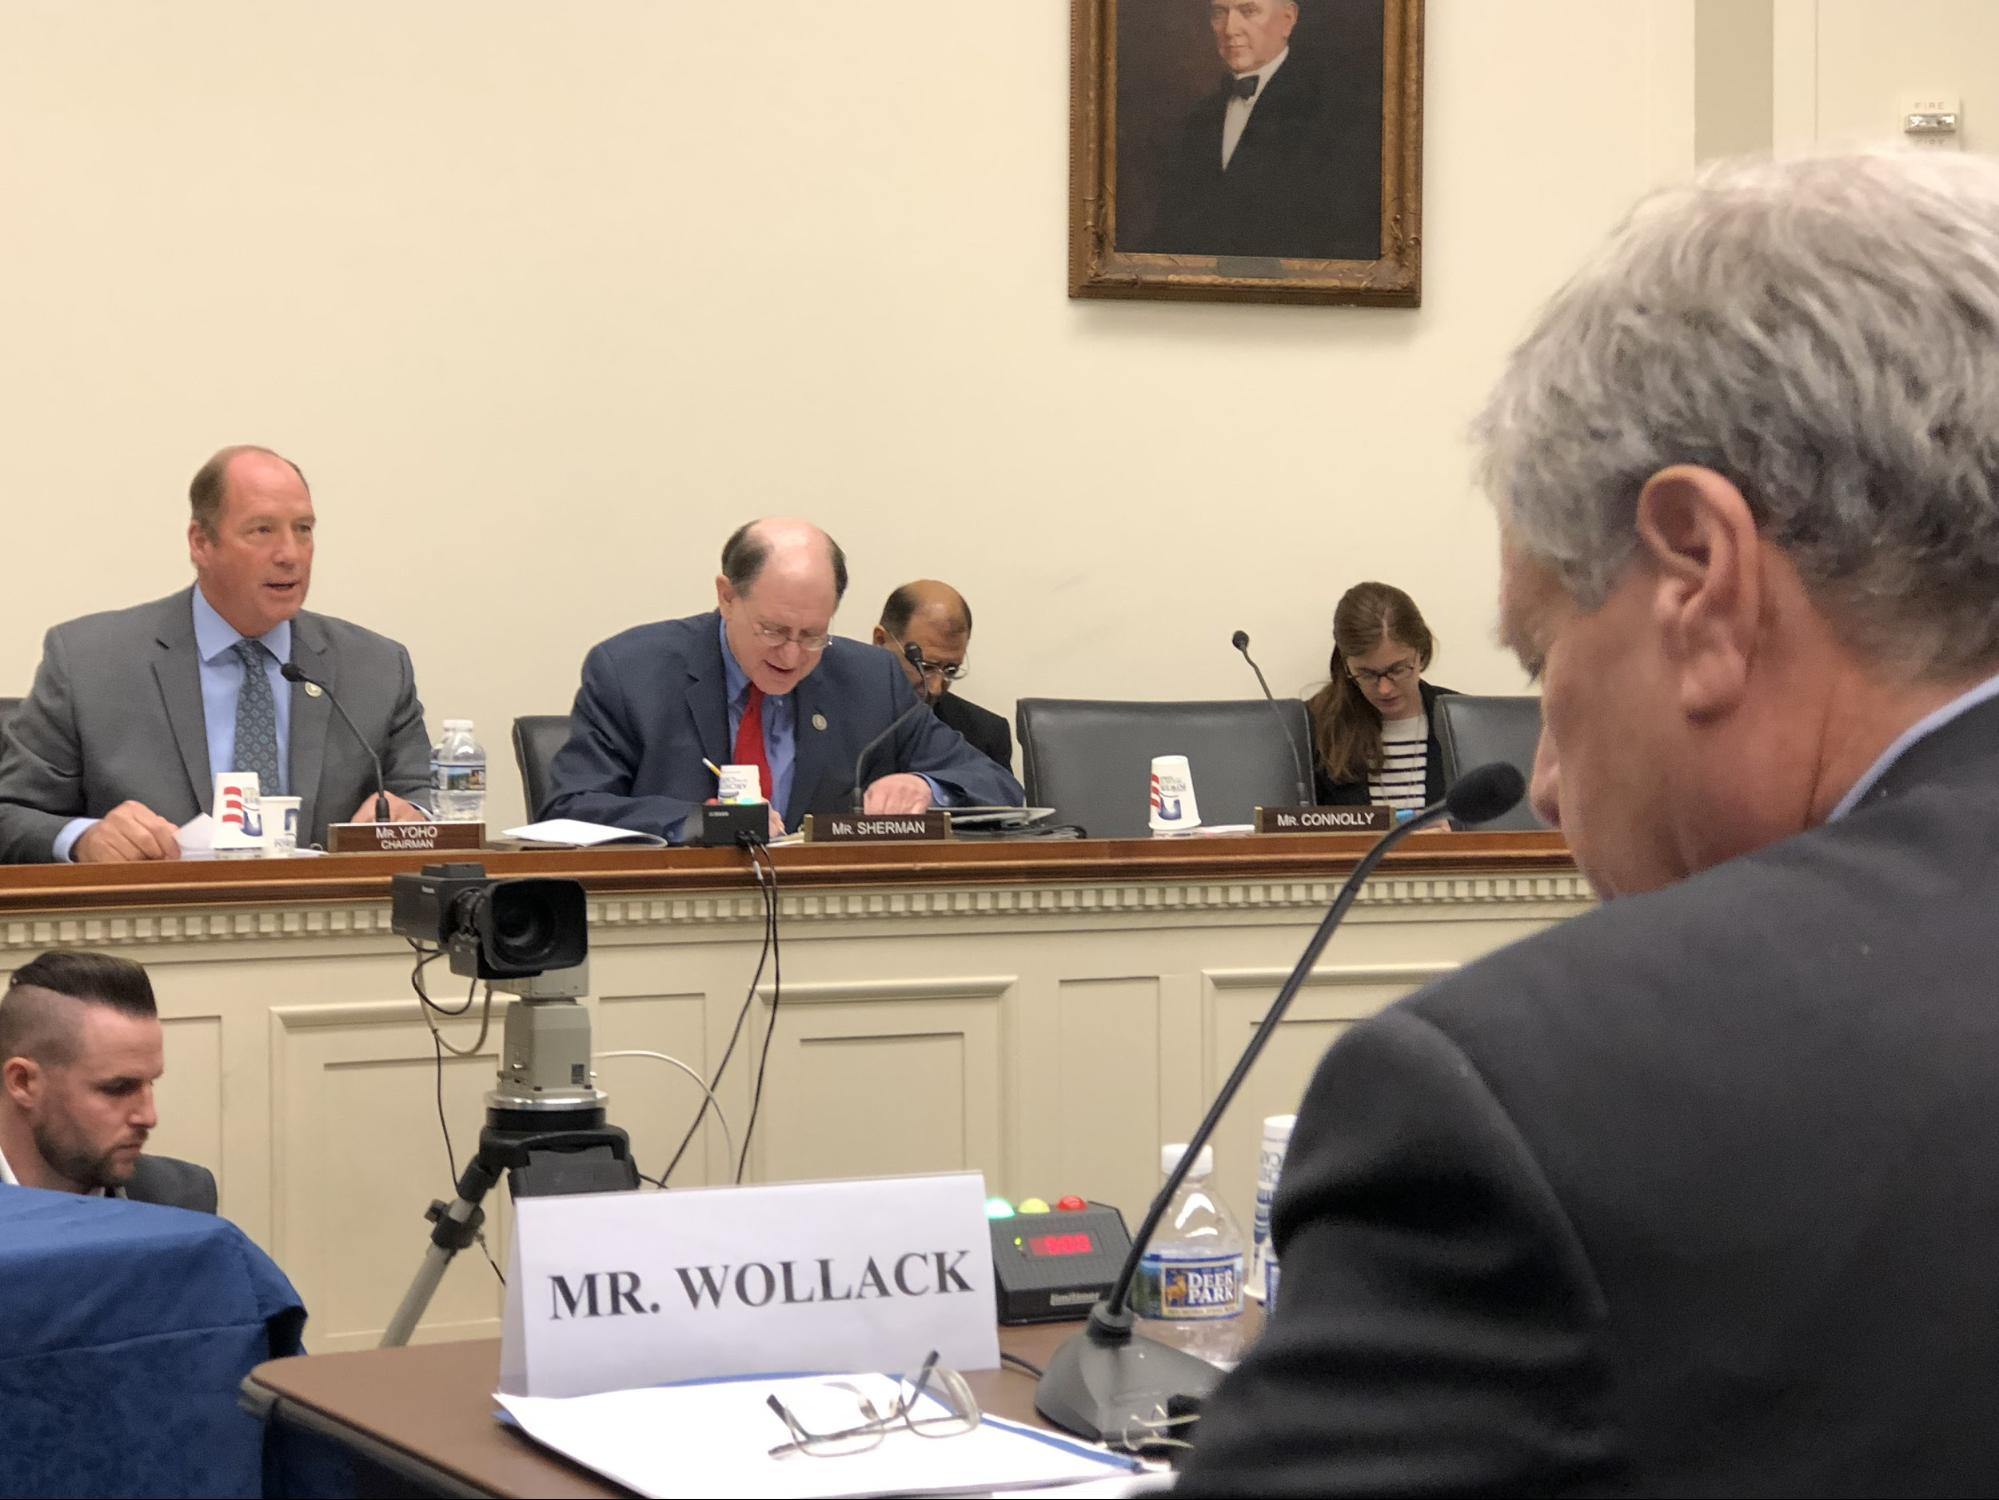 Chairman Ted Yoho and Ranking Member Brad Sherman question the witnesses on next steps to pressure the Cambodian government to reverse course.